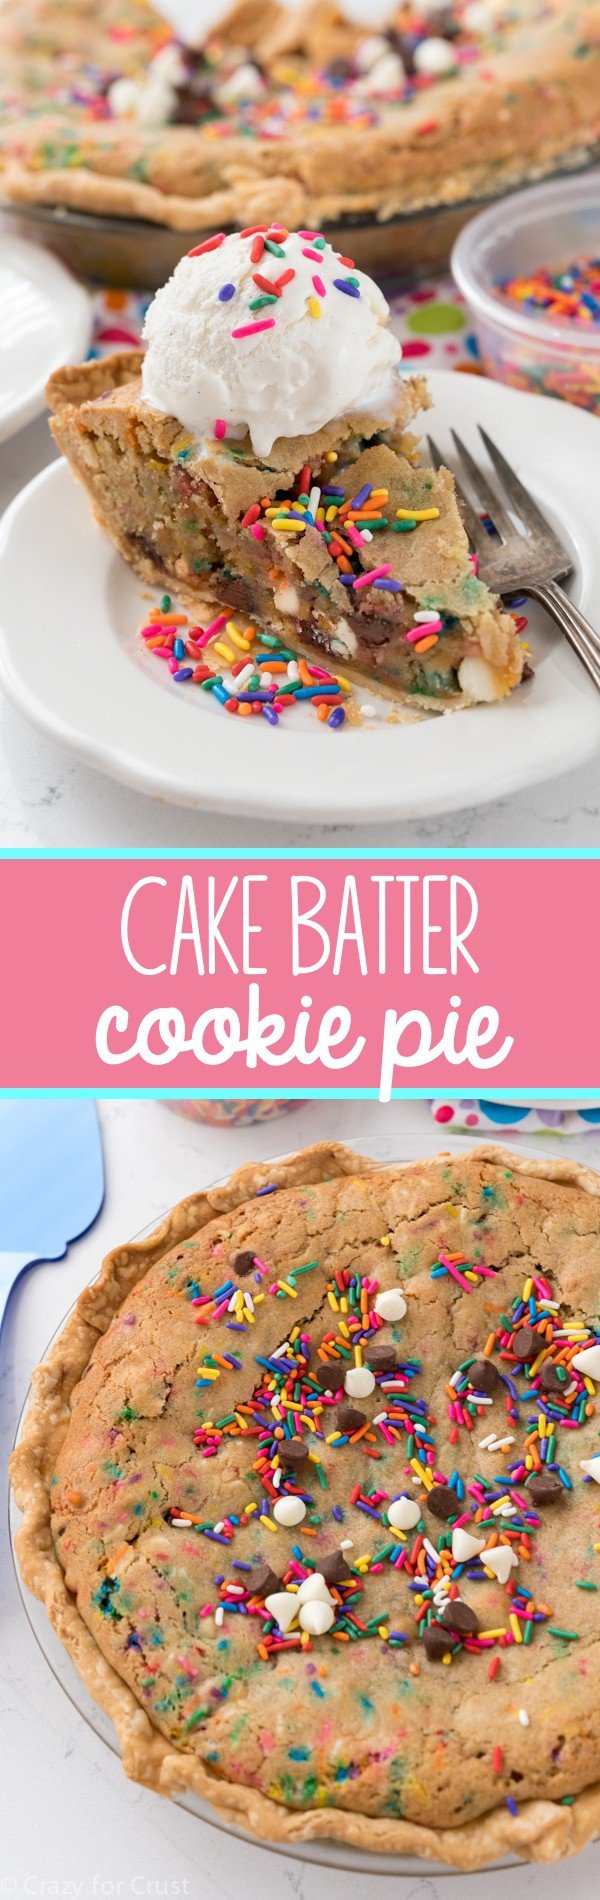 This Cake Batter Cookie Pie recipe couldn't be easier to make! It's a giant cake batter cookie in a pie crust. We couldn't stop eating this pie!